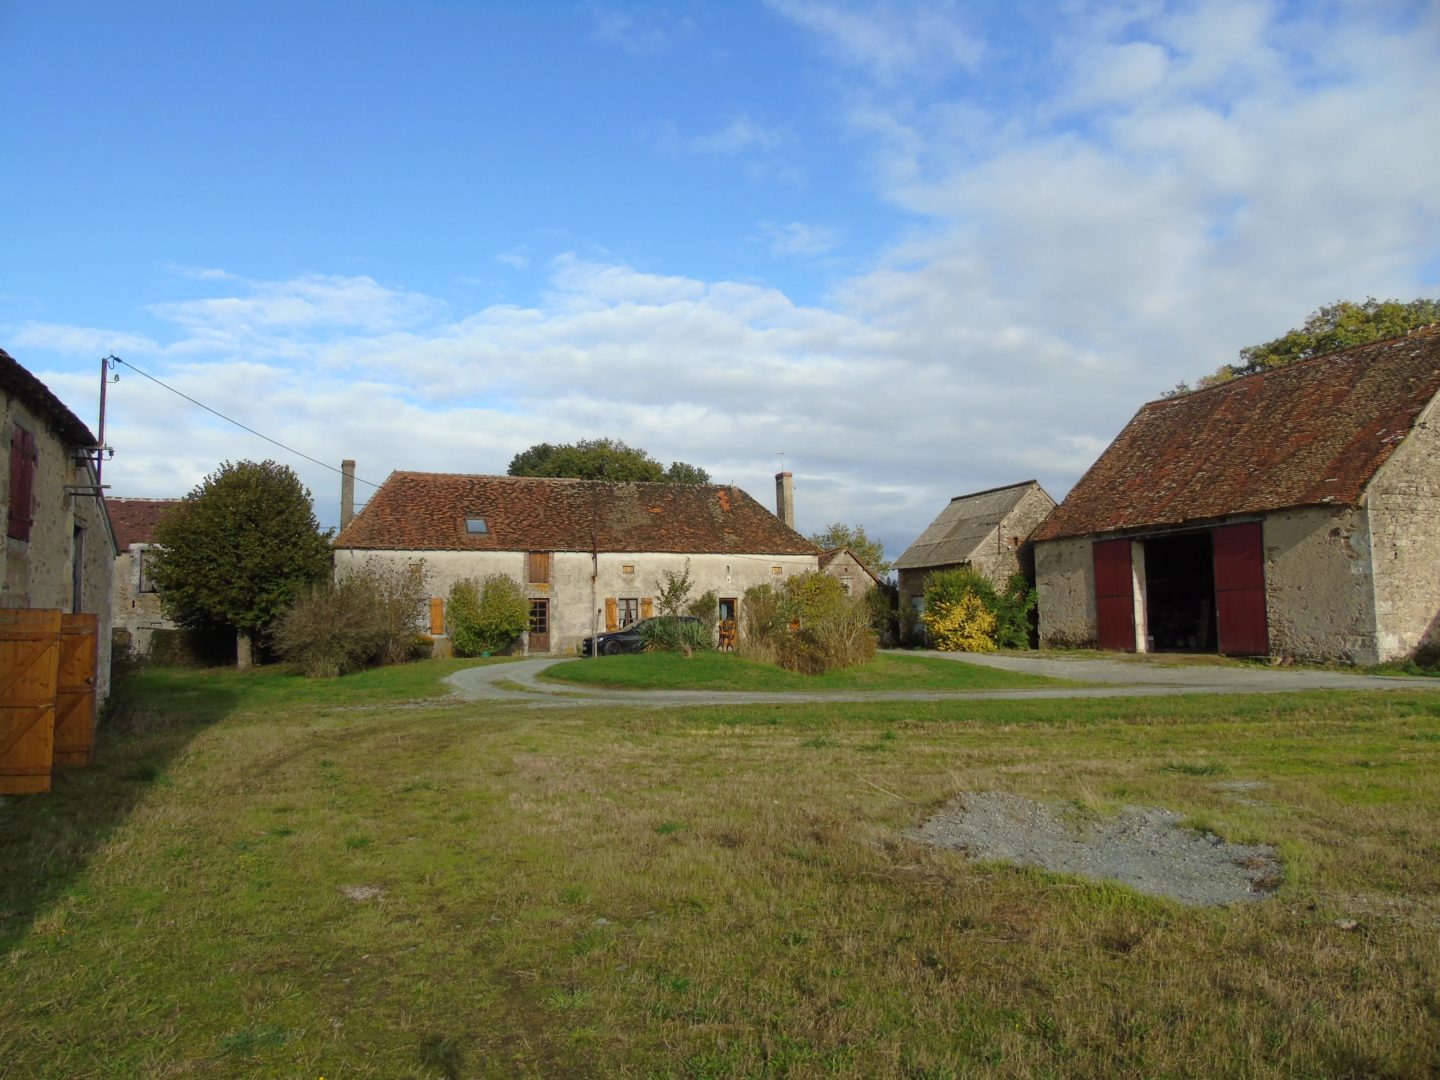 AGRICULTURAL PROPERTY OF 106 Ha WITH HOUSE AND OUTBUILDINGS - 9091PO